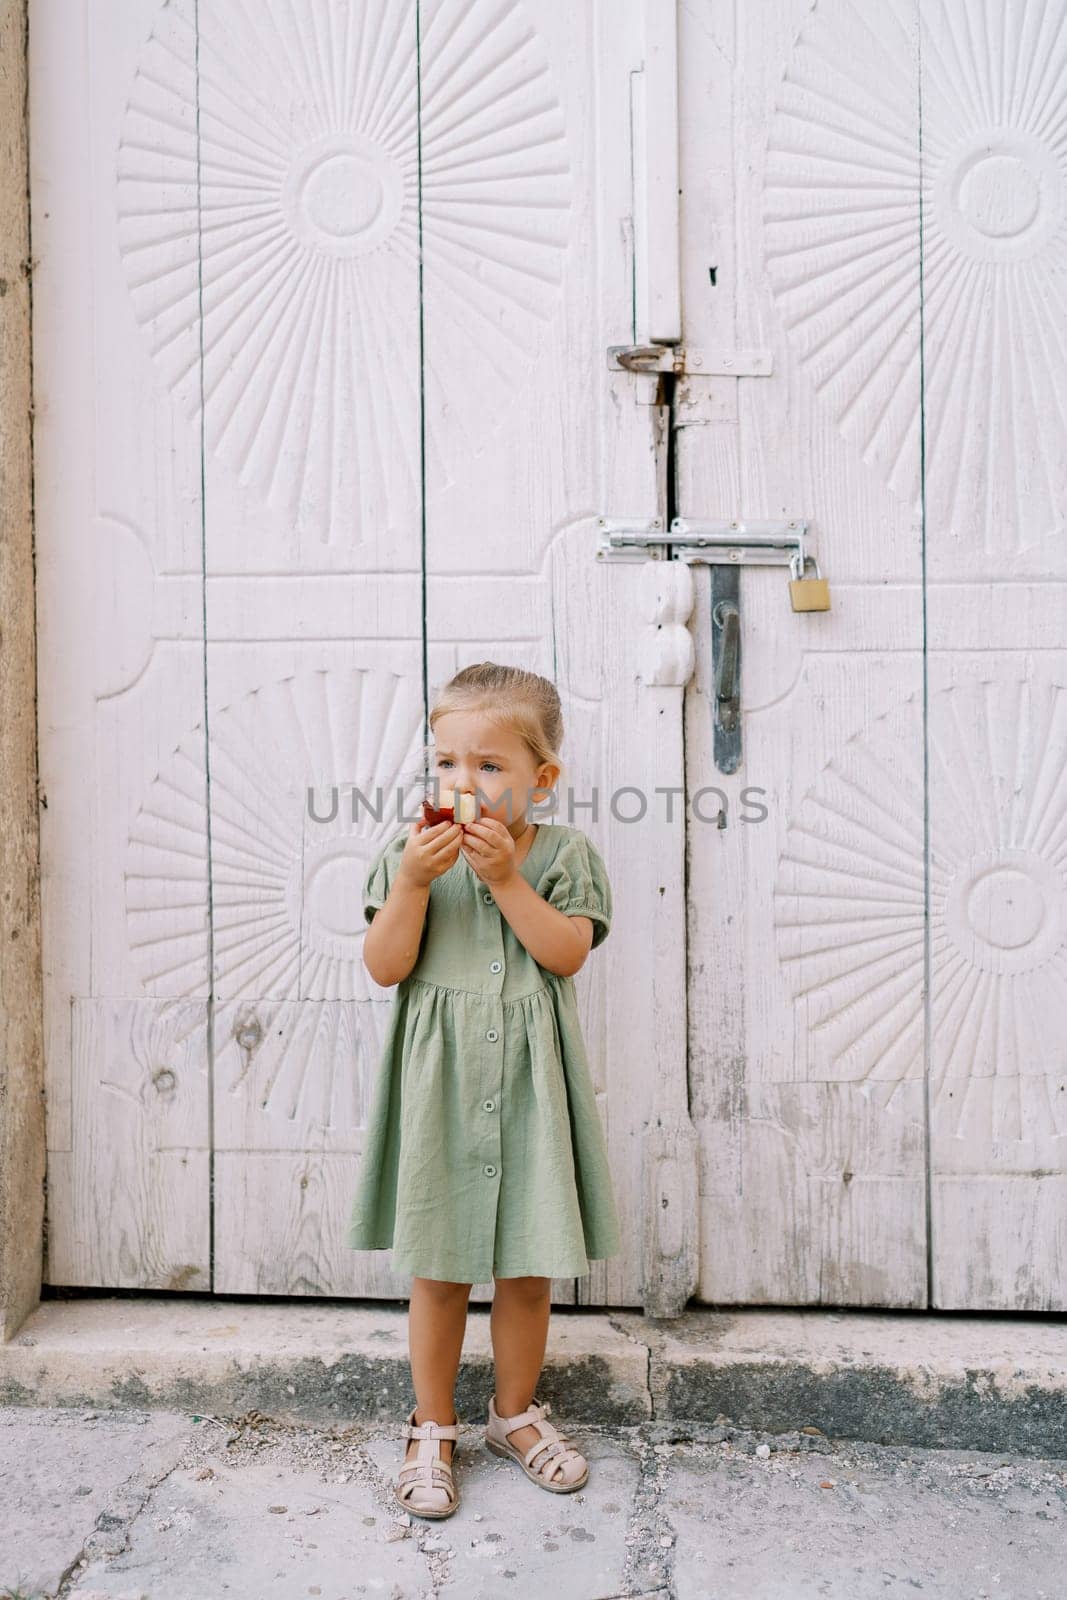 Little girl gnaws a big apple while standing near a wooden antique carved door. High quality photo